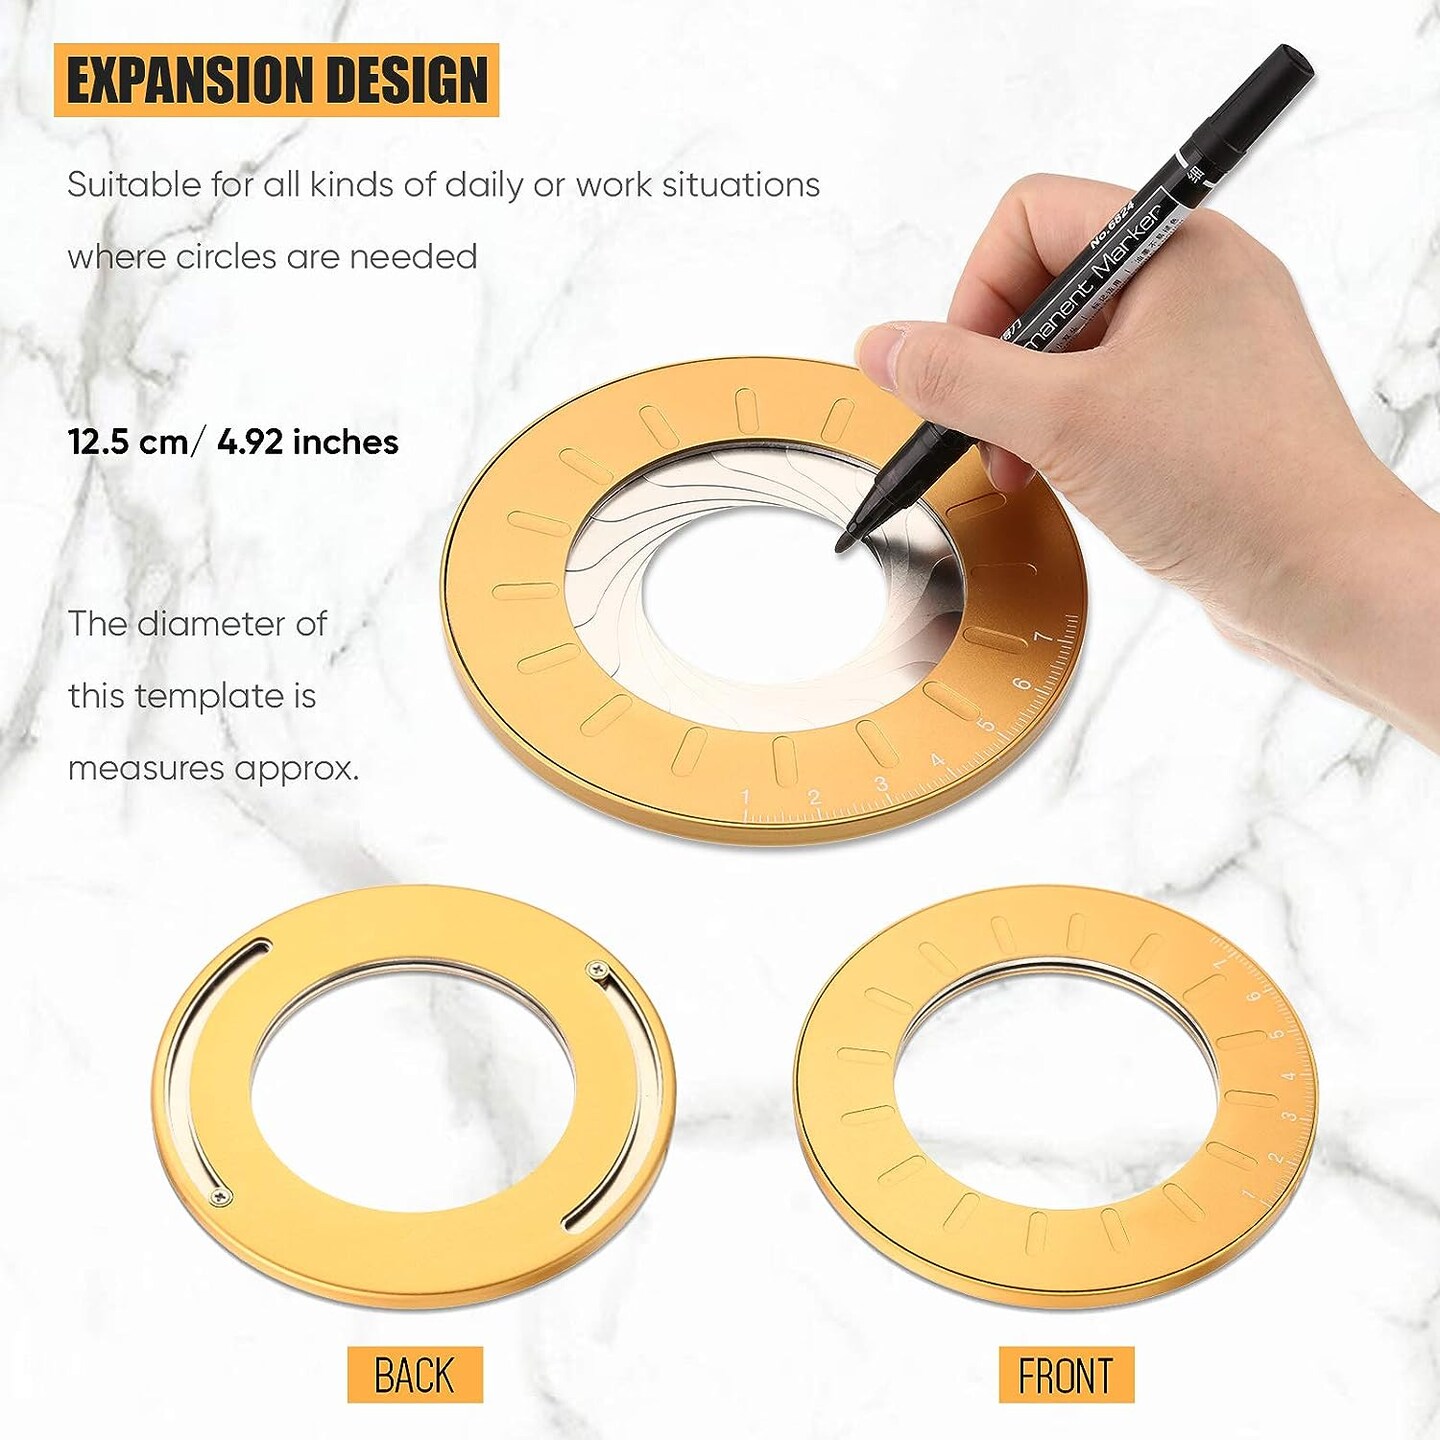 Circle Drawing Maker Aluminum Alloy Circle Template Adjustable Circle Drawing Tool Round Circle Template Tool Ring Circle Making Tool with Black Flannelette Bag for Drafting, 125 mm (Yellow)